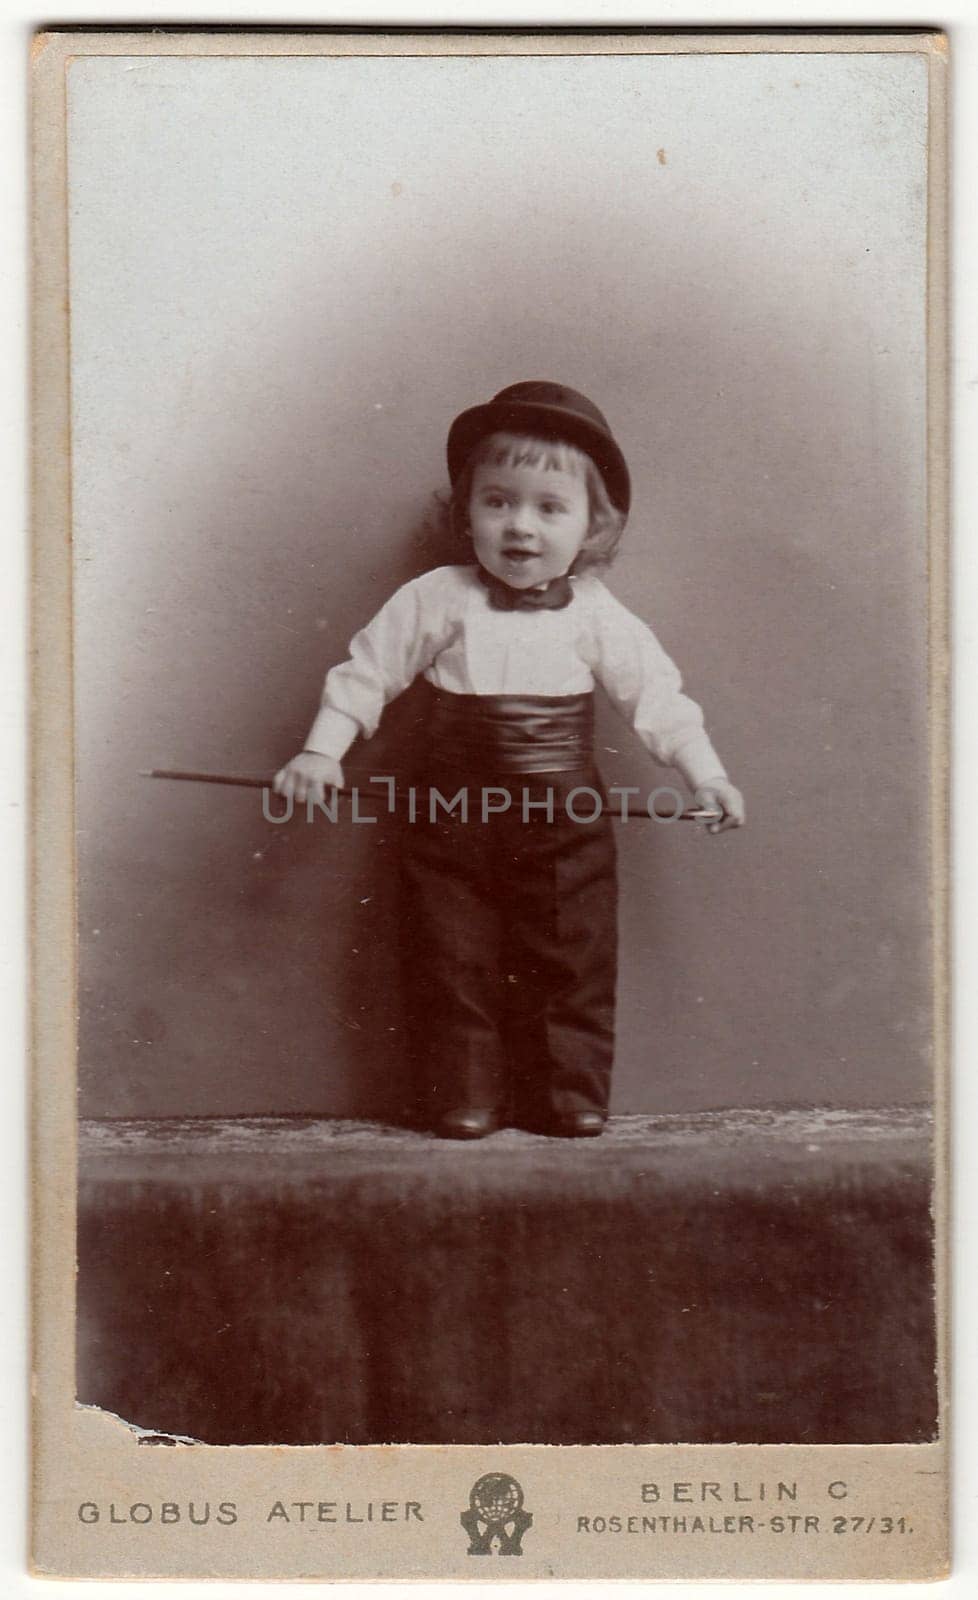 BERLIN, GERMANY - CIRCA 1905: Vintage cabinet card shows cute small boy wears bowler hat, bow tie, cummerbund and holds walking stick. Antique black white photo.